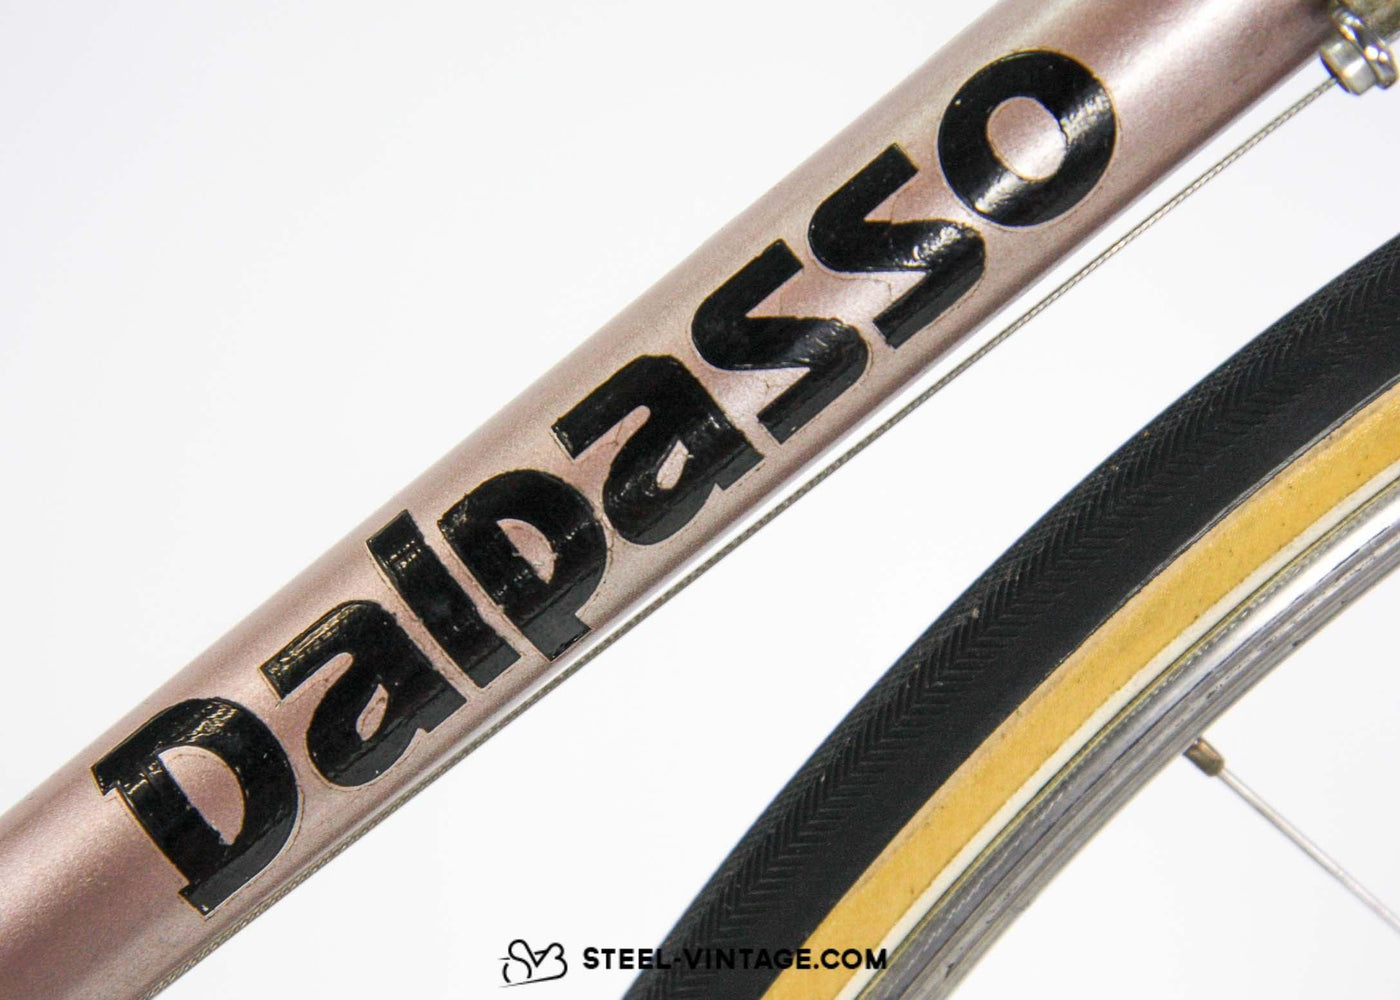 Dalpasso Special Classic Road Bicycle 1974 - Steel Vintage Bikes